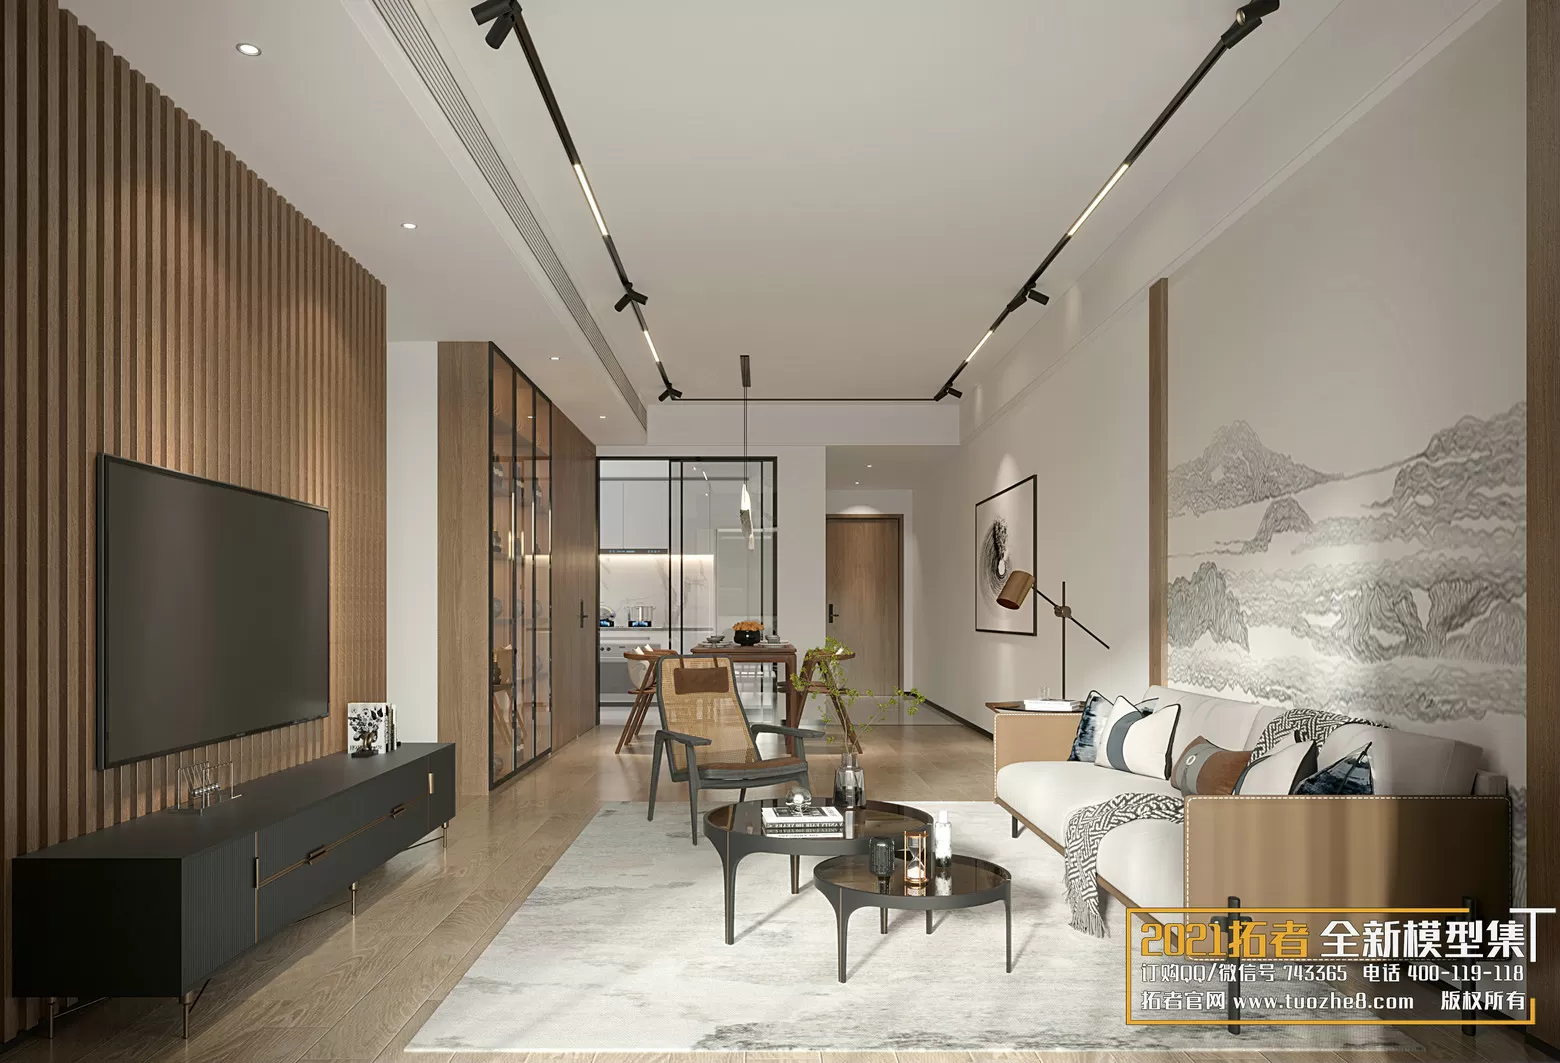 EXTENSION 2021 – 1. LIVING ROOM – 1.2. CHINESE STYLES – 24 – CORONA